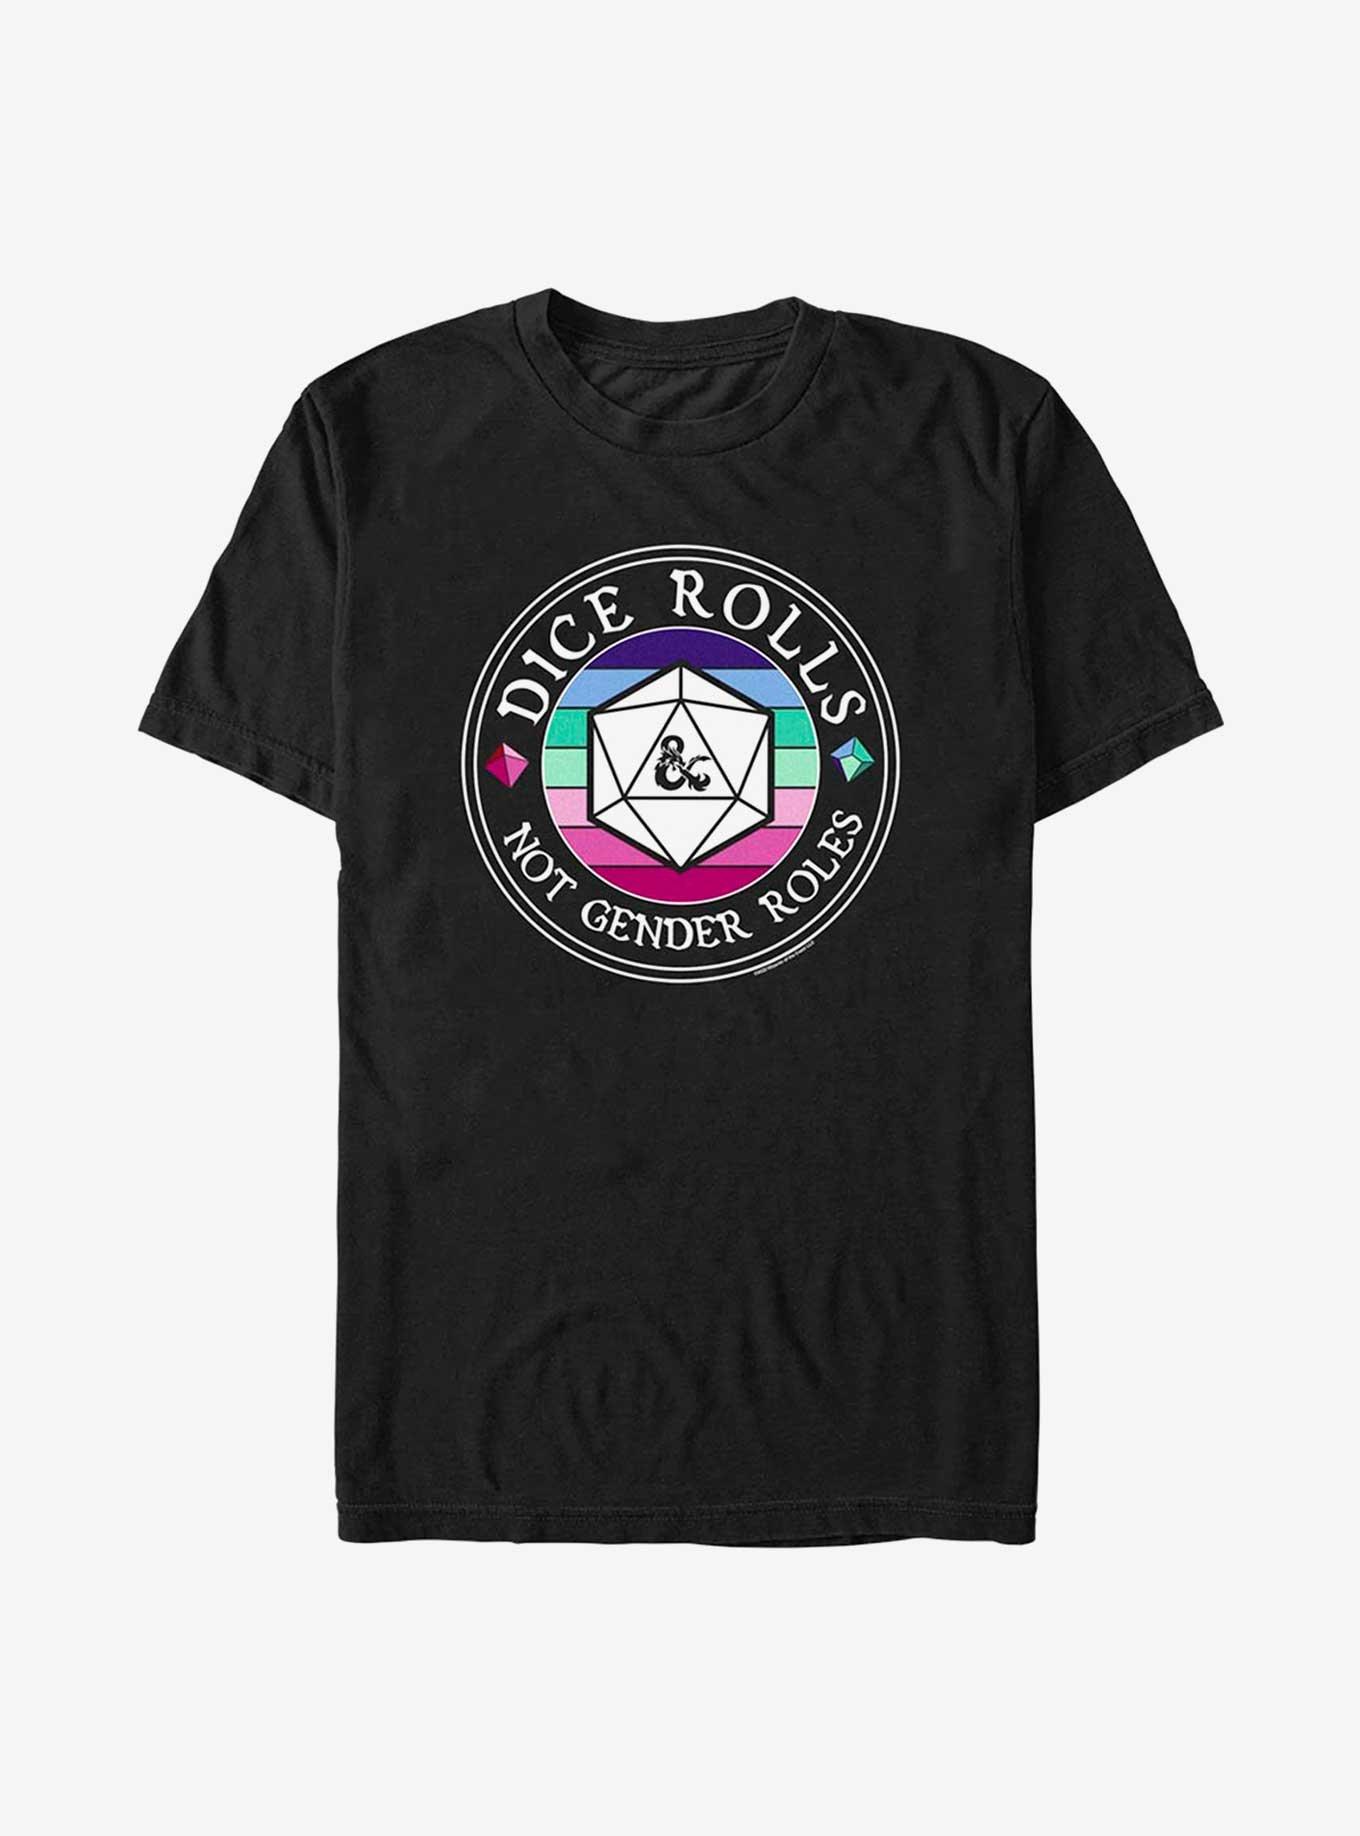 Dungeons And Dragons Dice Rolls Not Gender Roles T-Shirt, BLACK, hi-res